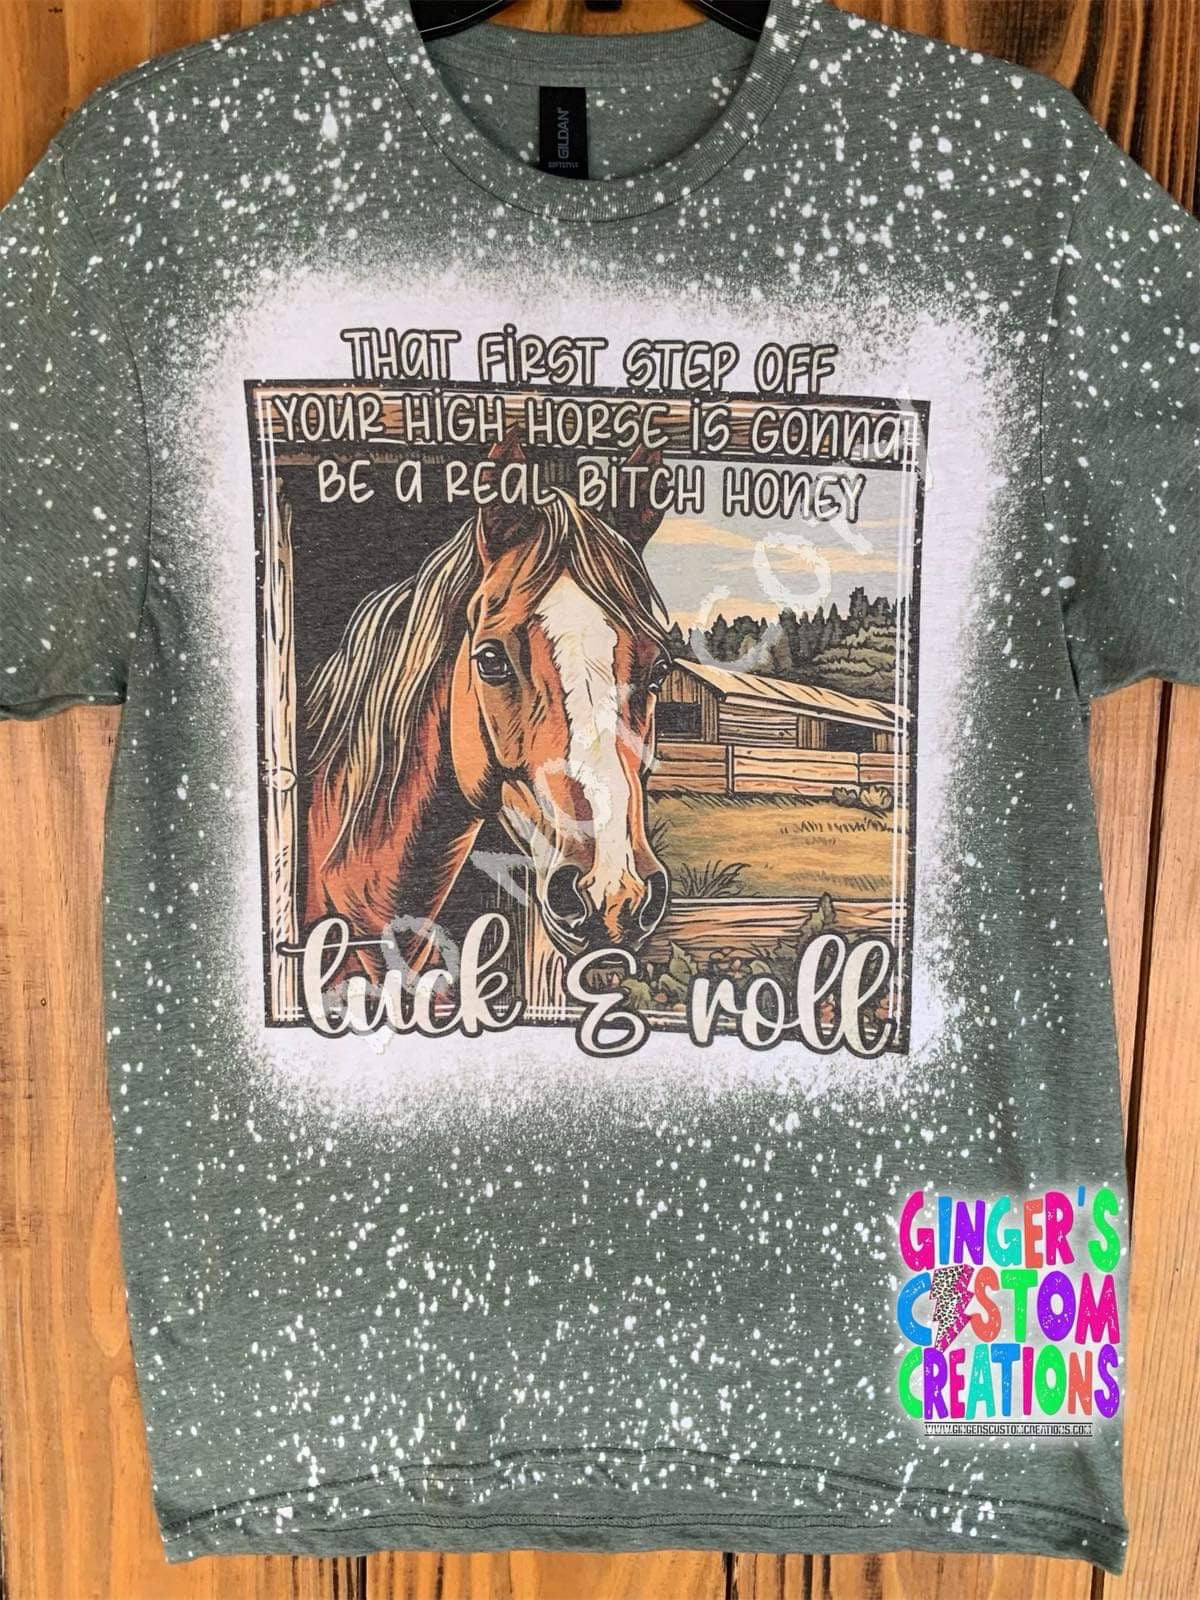 THAT FIRST STEP OFF YOUR HIGH HORSE IS GONNA BE A REAL B*TCH HONEY SHORT SLEEVE - BLEACHED SHIRT